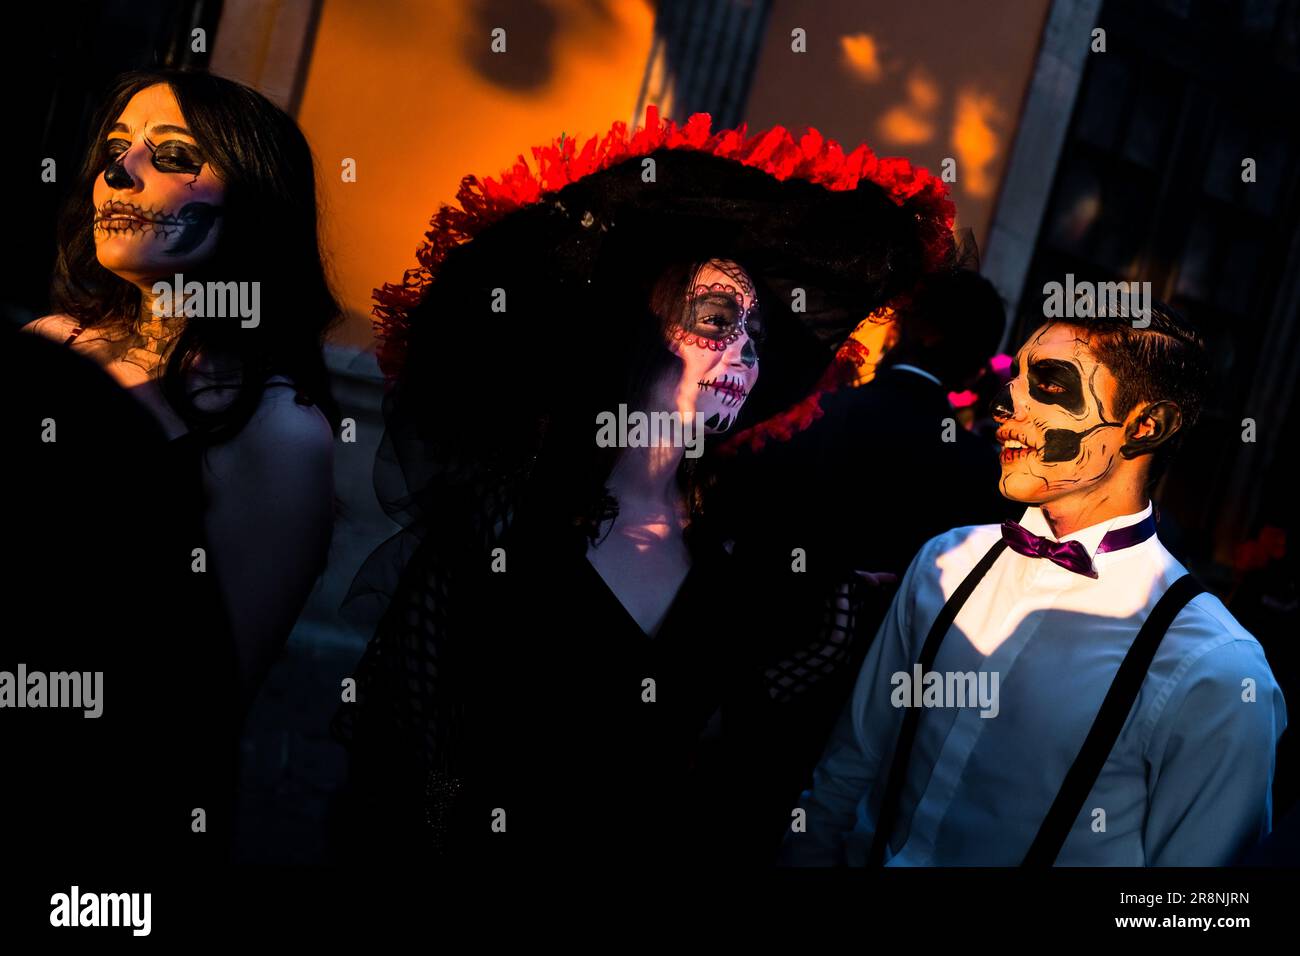 Mexican women, dressed as La Catrina, and a Mexican man, dressed as Catrín, take part in the Day of the Dead celebrations in Morelia, Mexico. Stock Photo